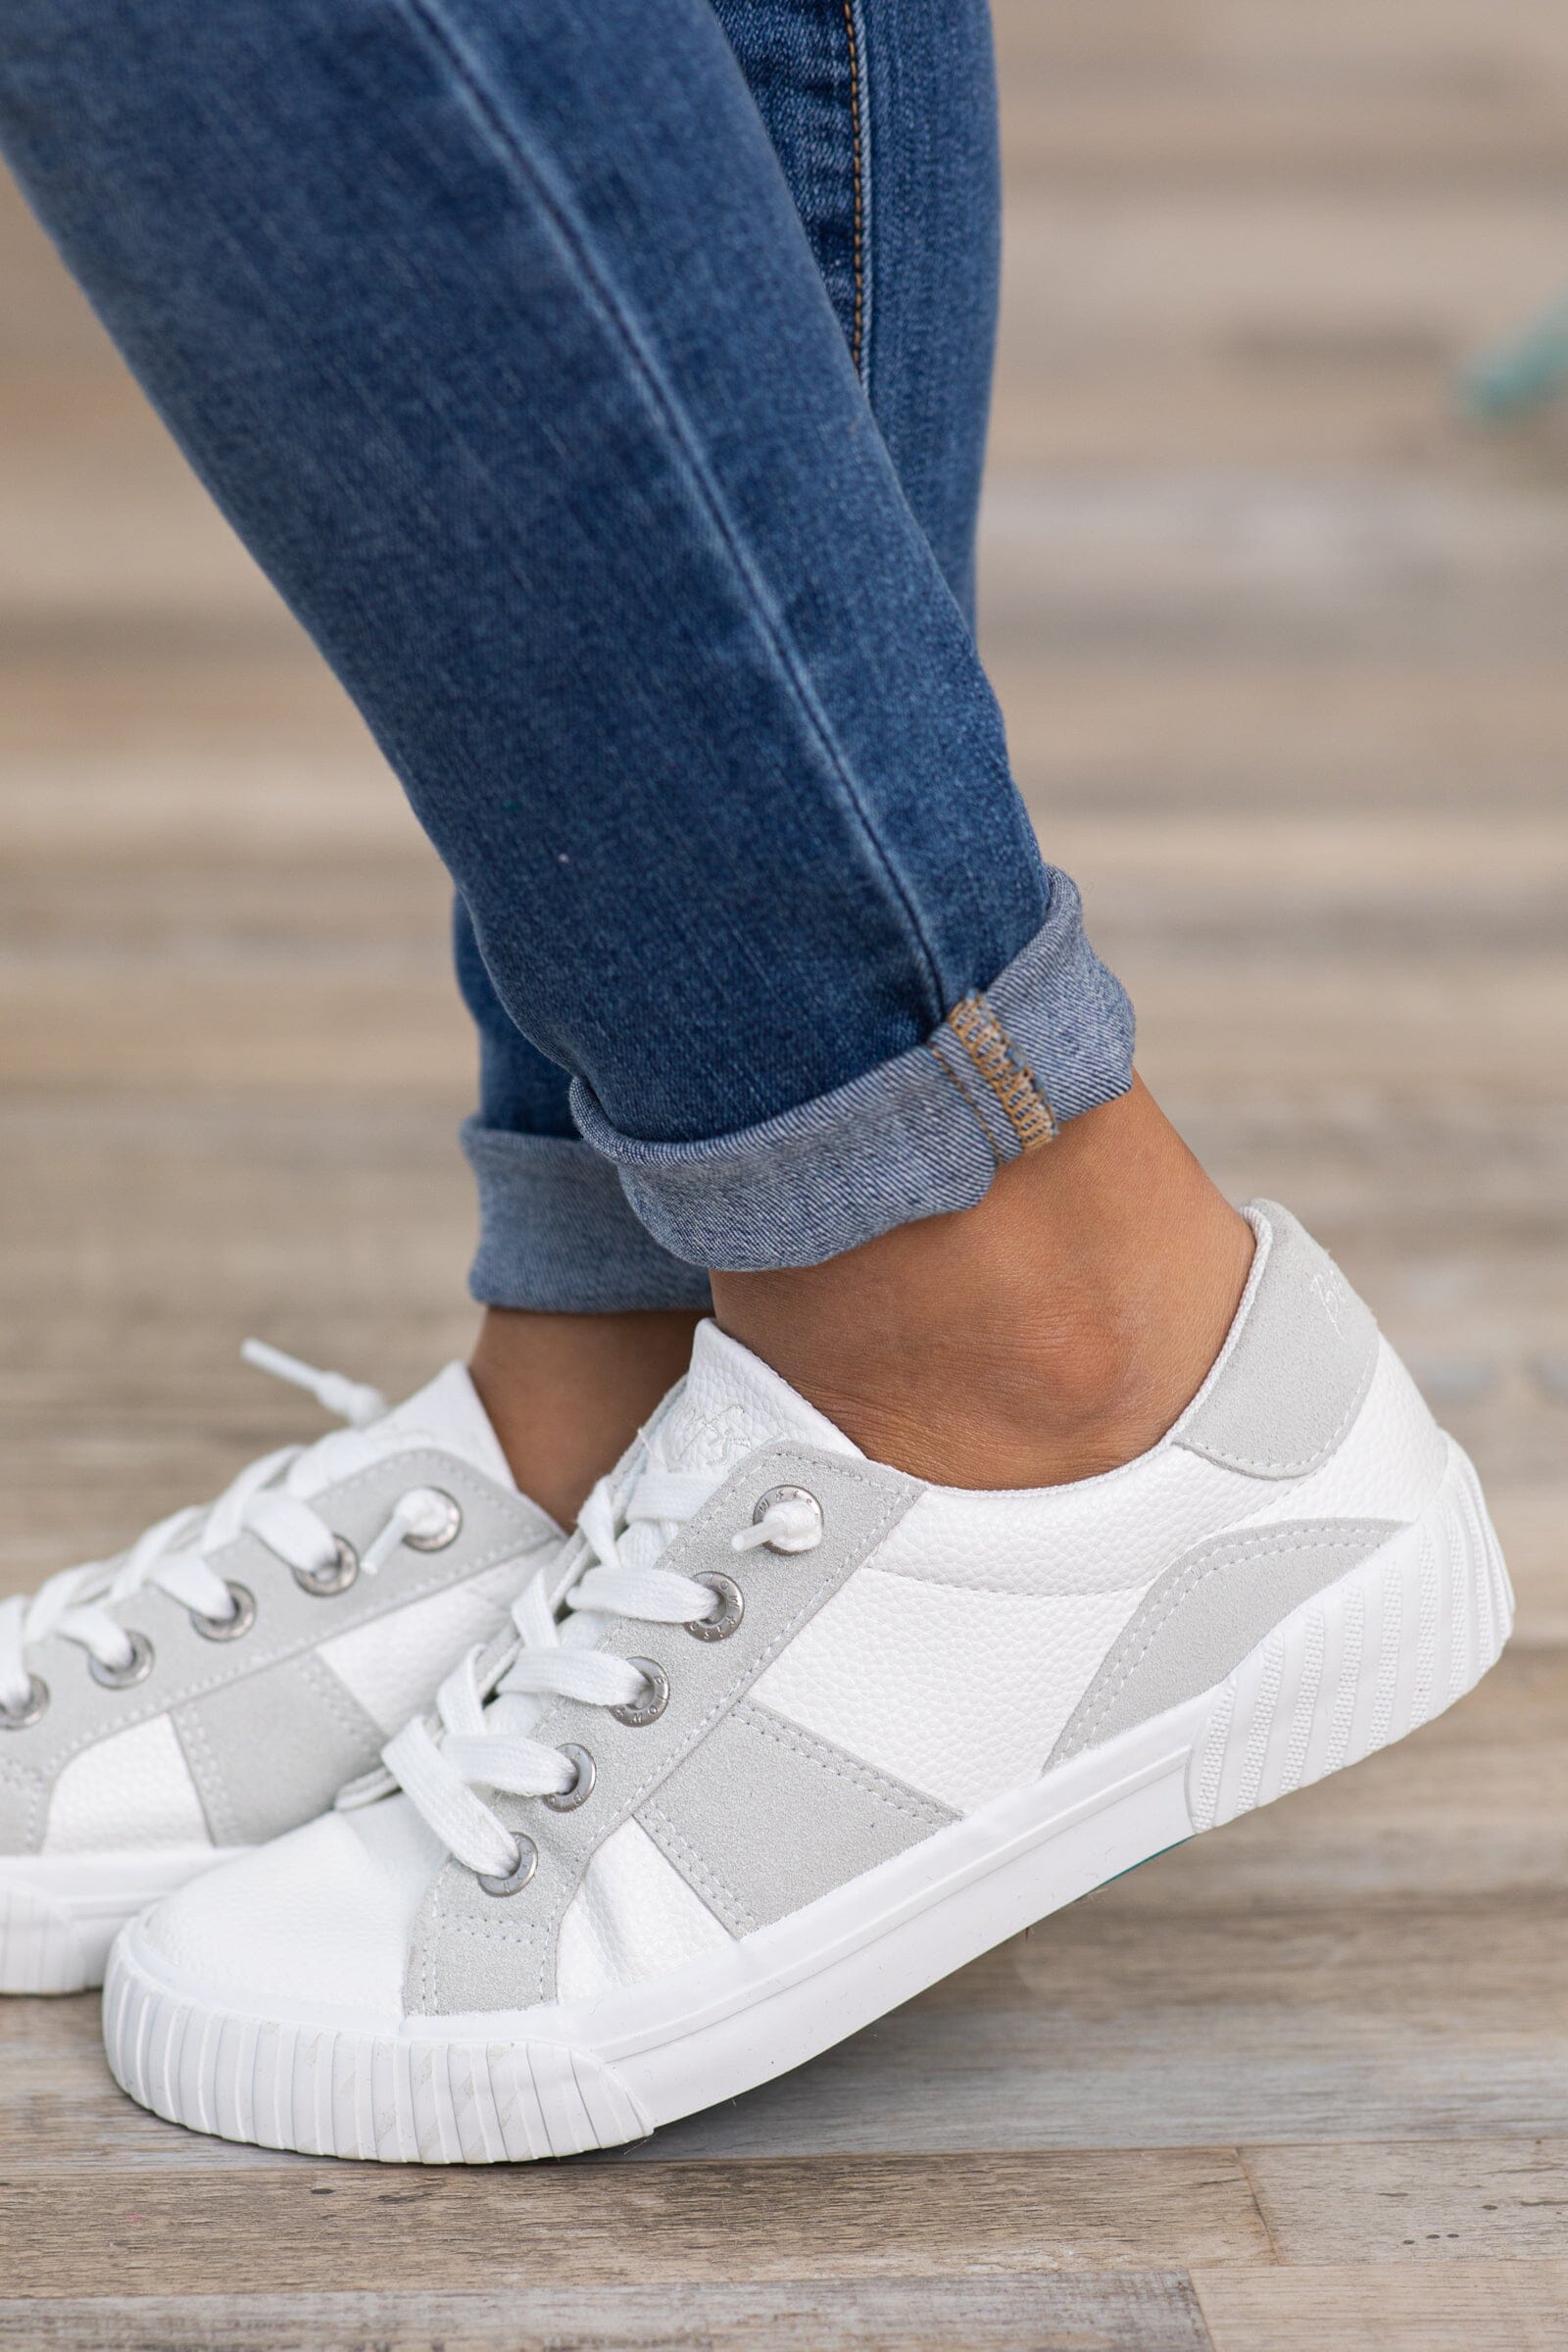 White and Grey Colorblock Sneakers - Filly Flair